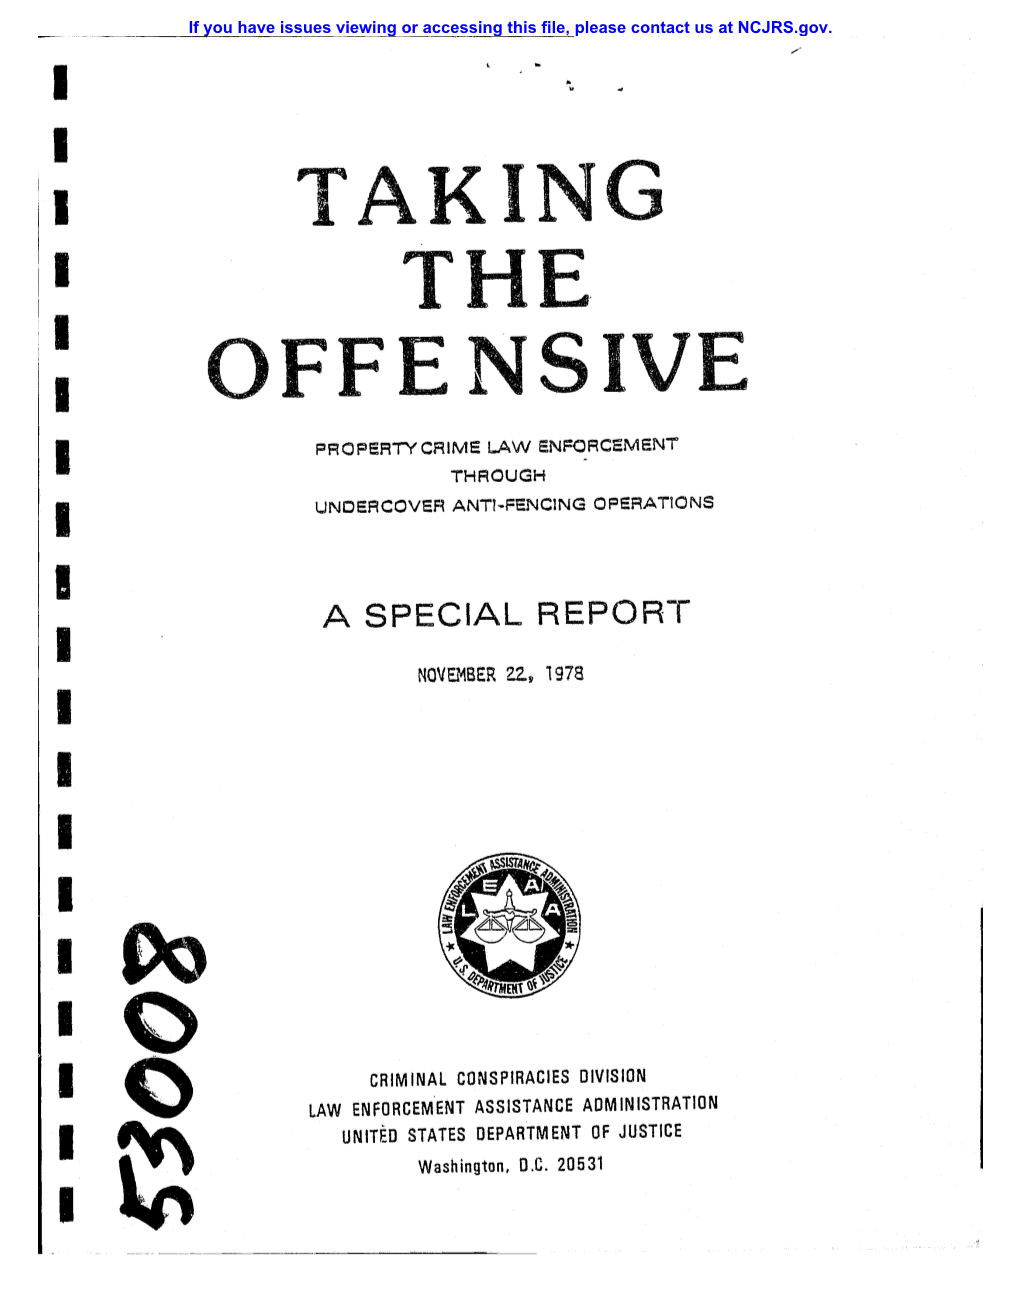 Taking the Offensive